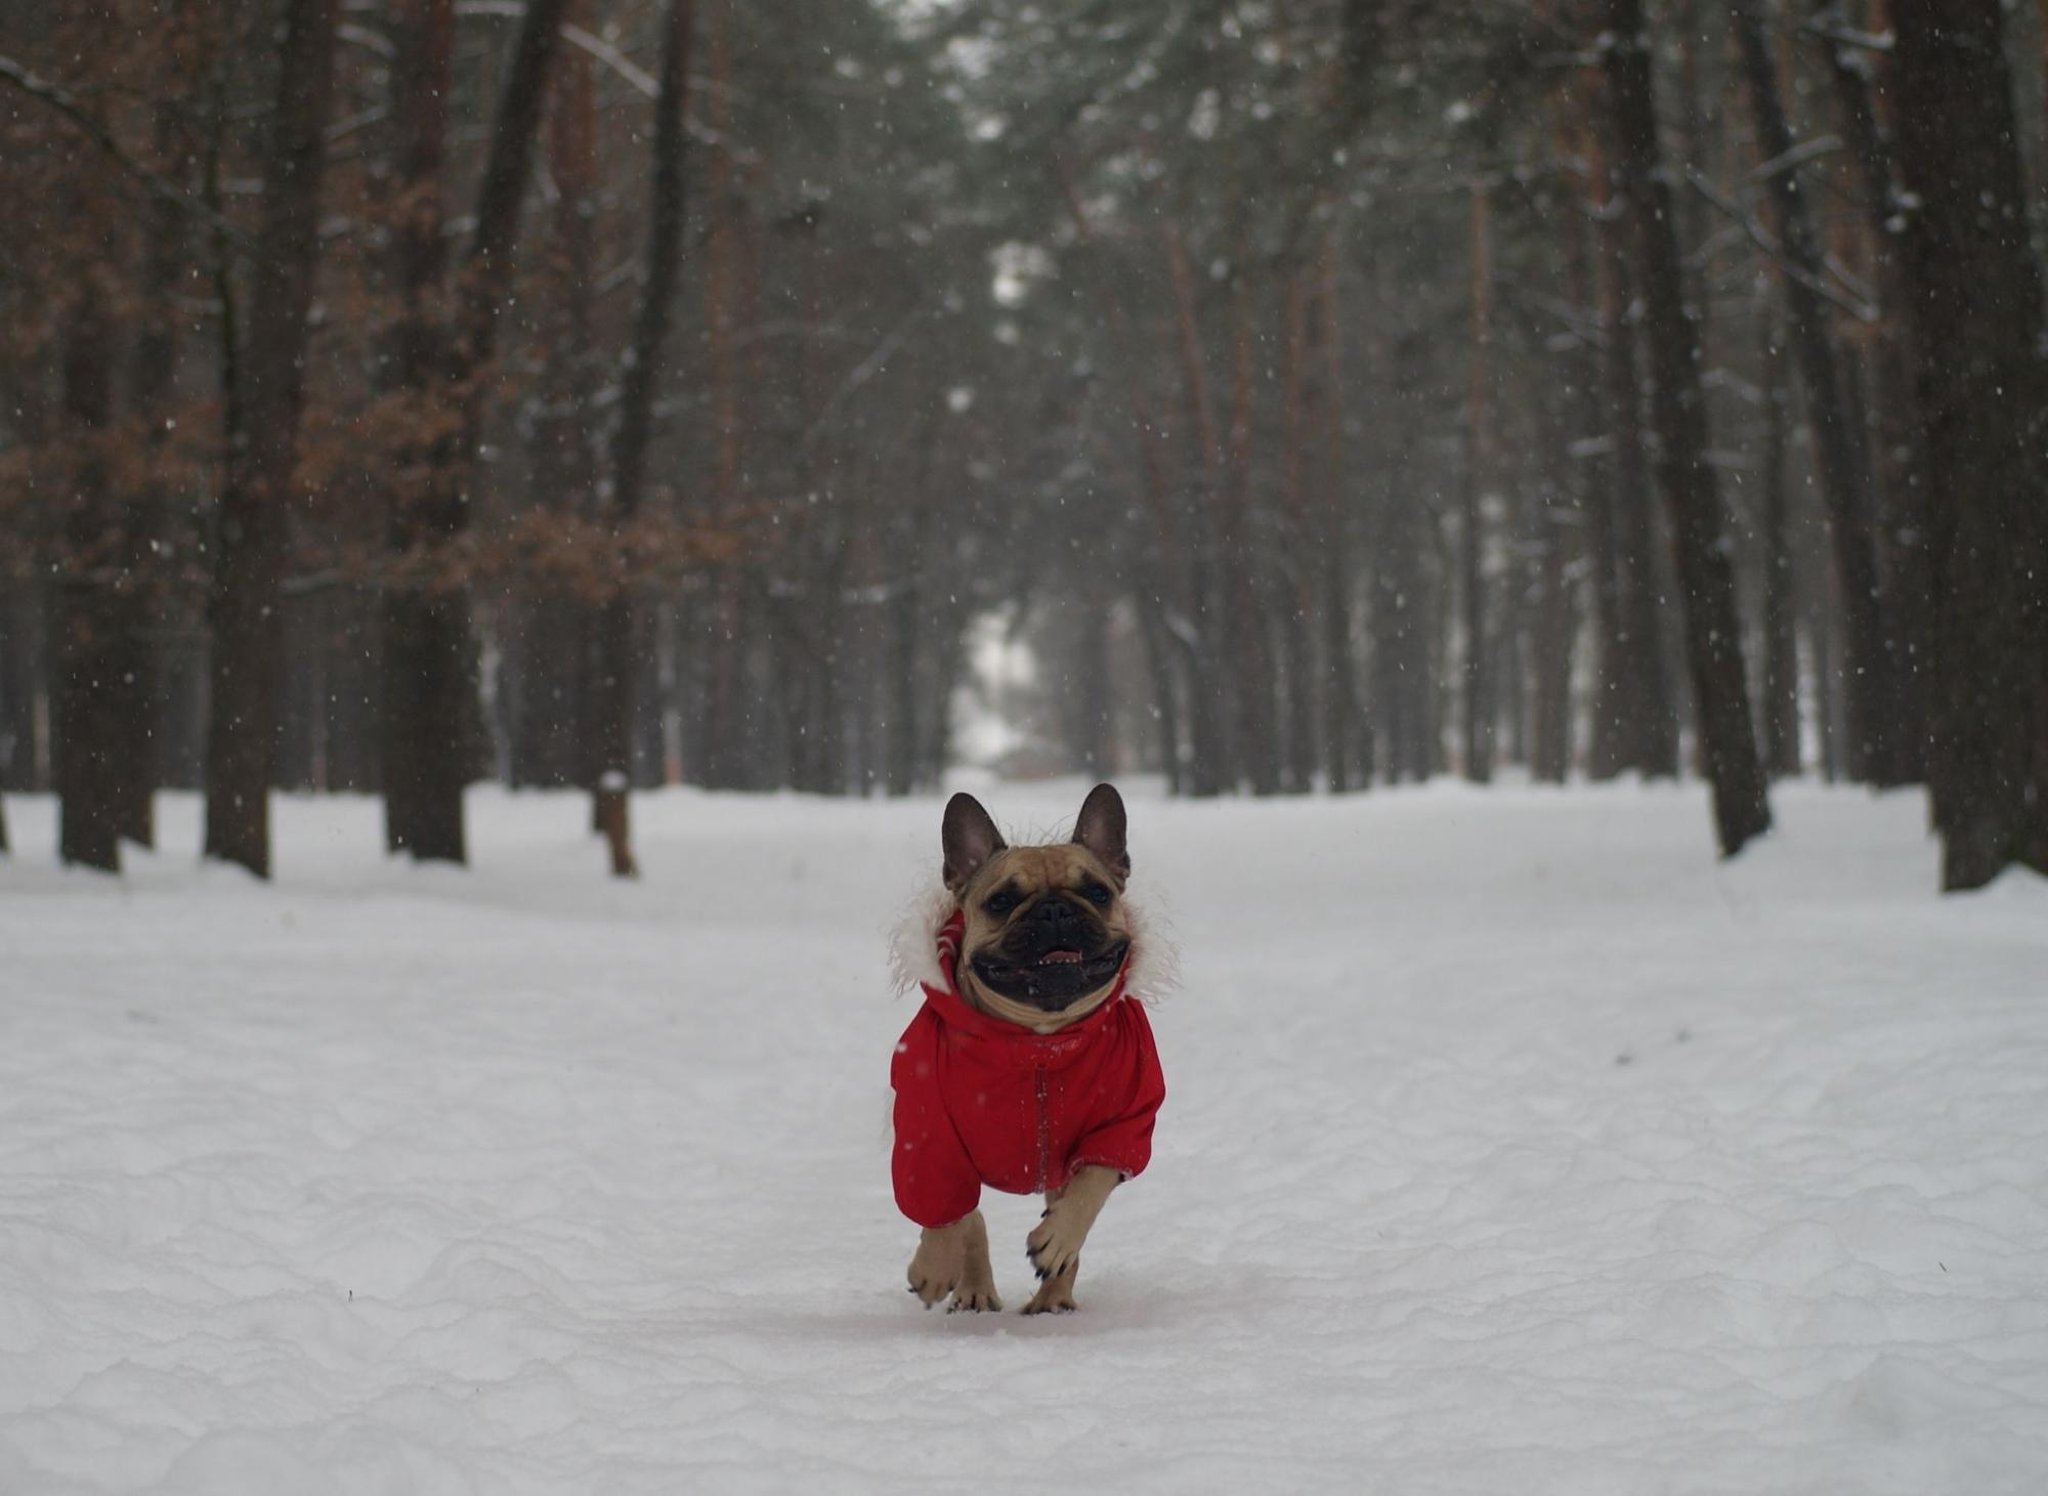 Here are the 10 breeds of adorable dogs that loathe the cold so need wrapped up warm on winter walks